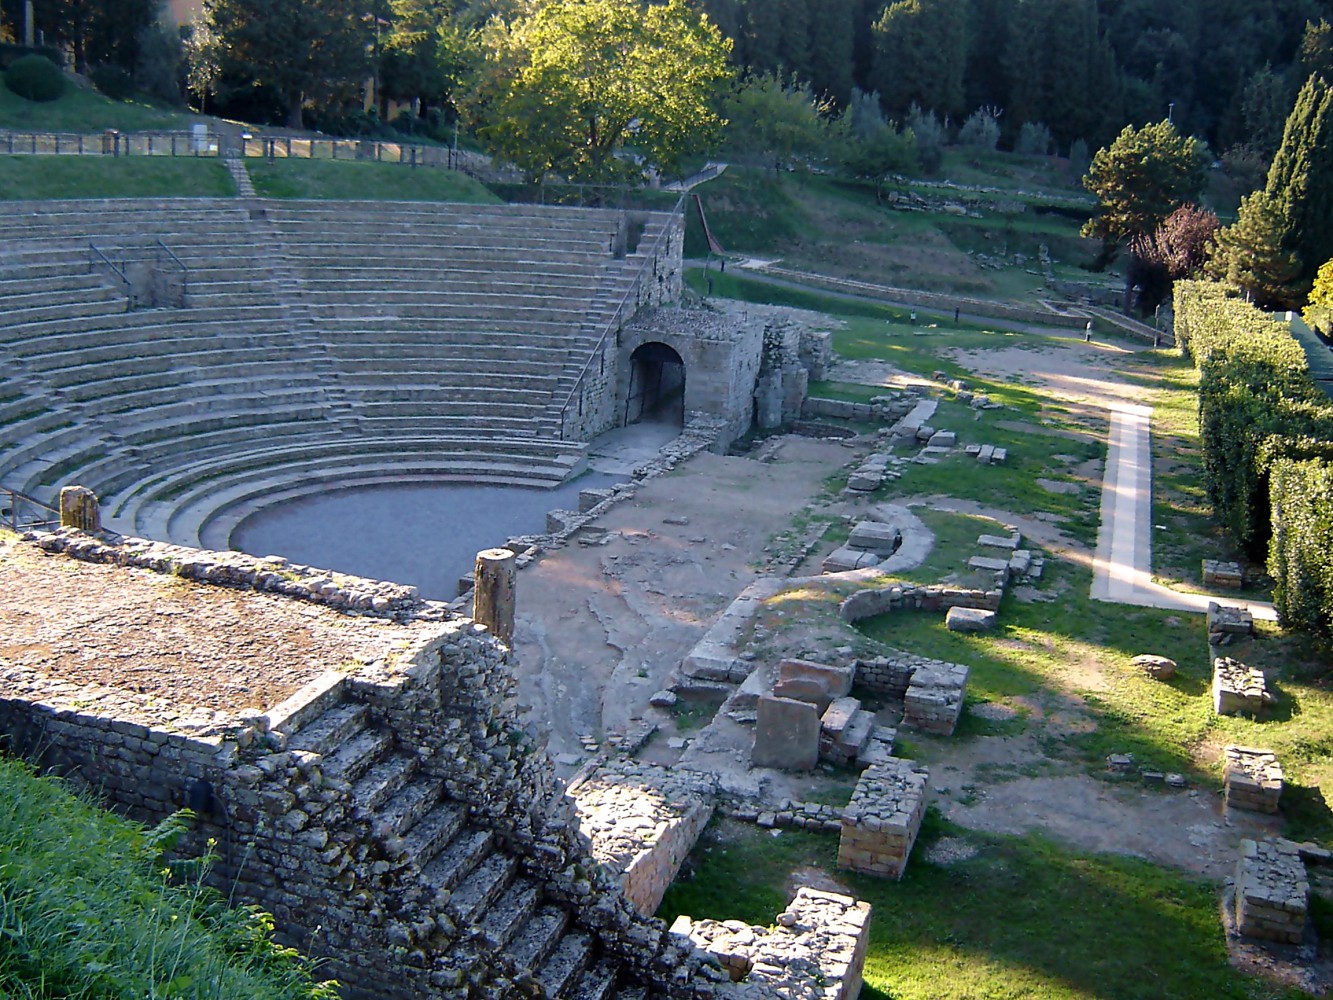 FIESOLE AND THE ARCHAEOLOGICAL AREA